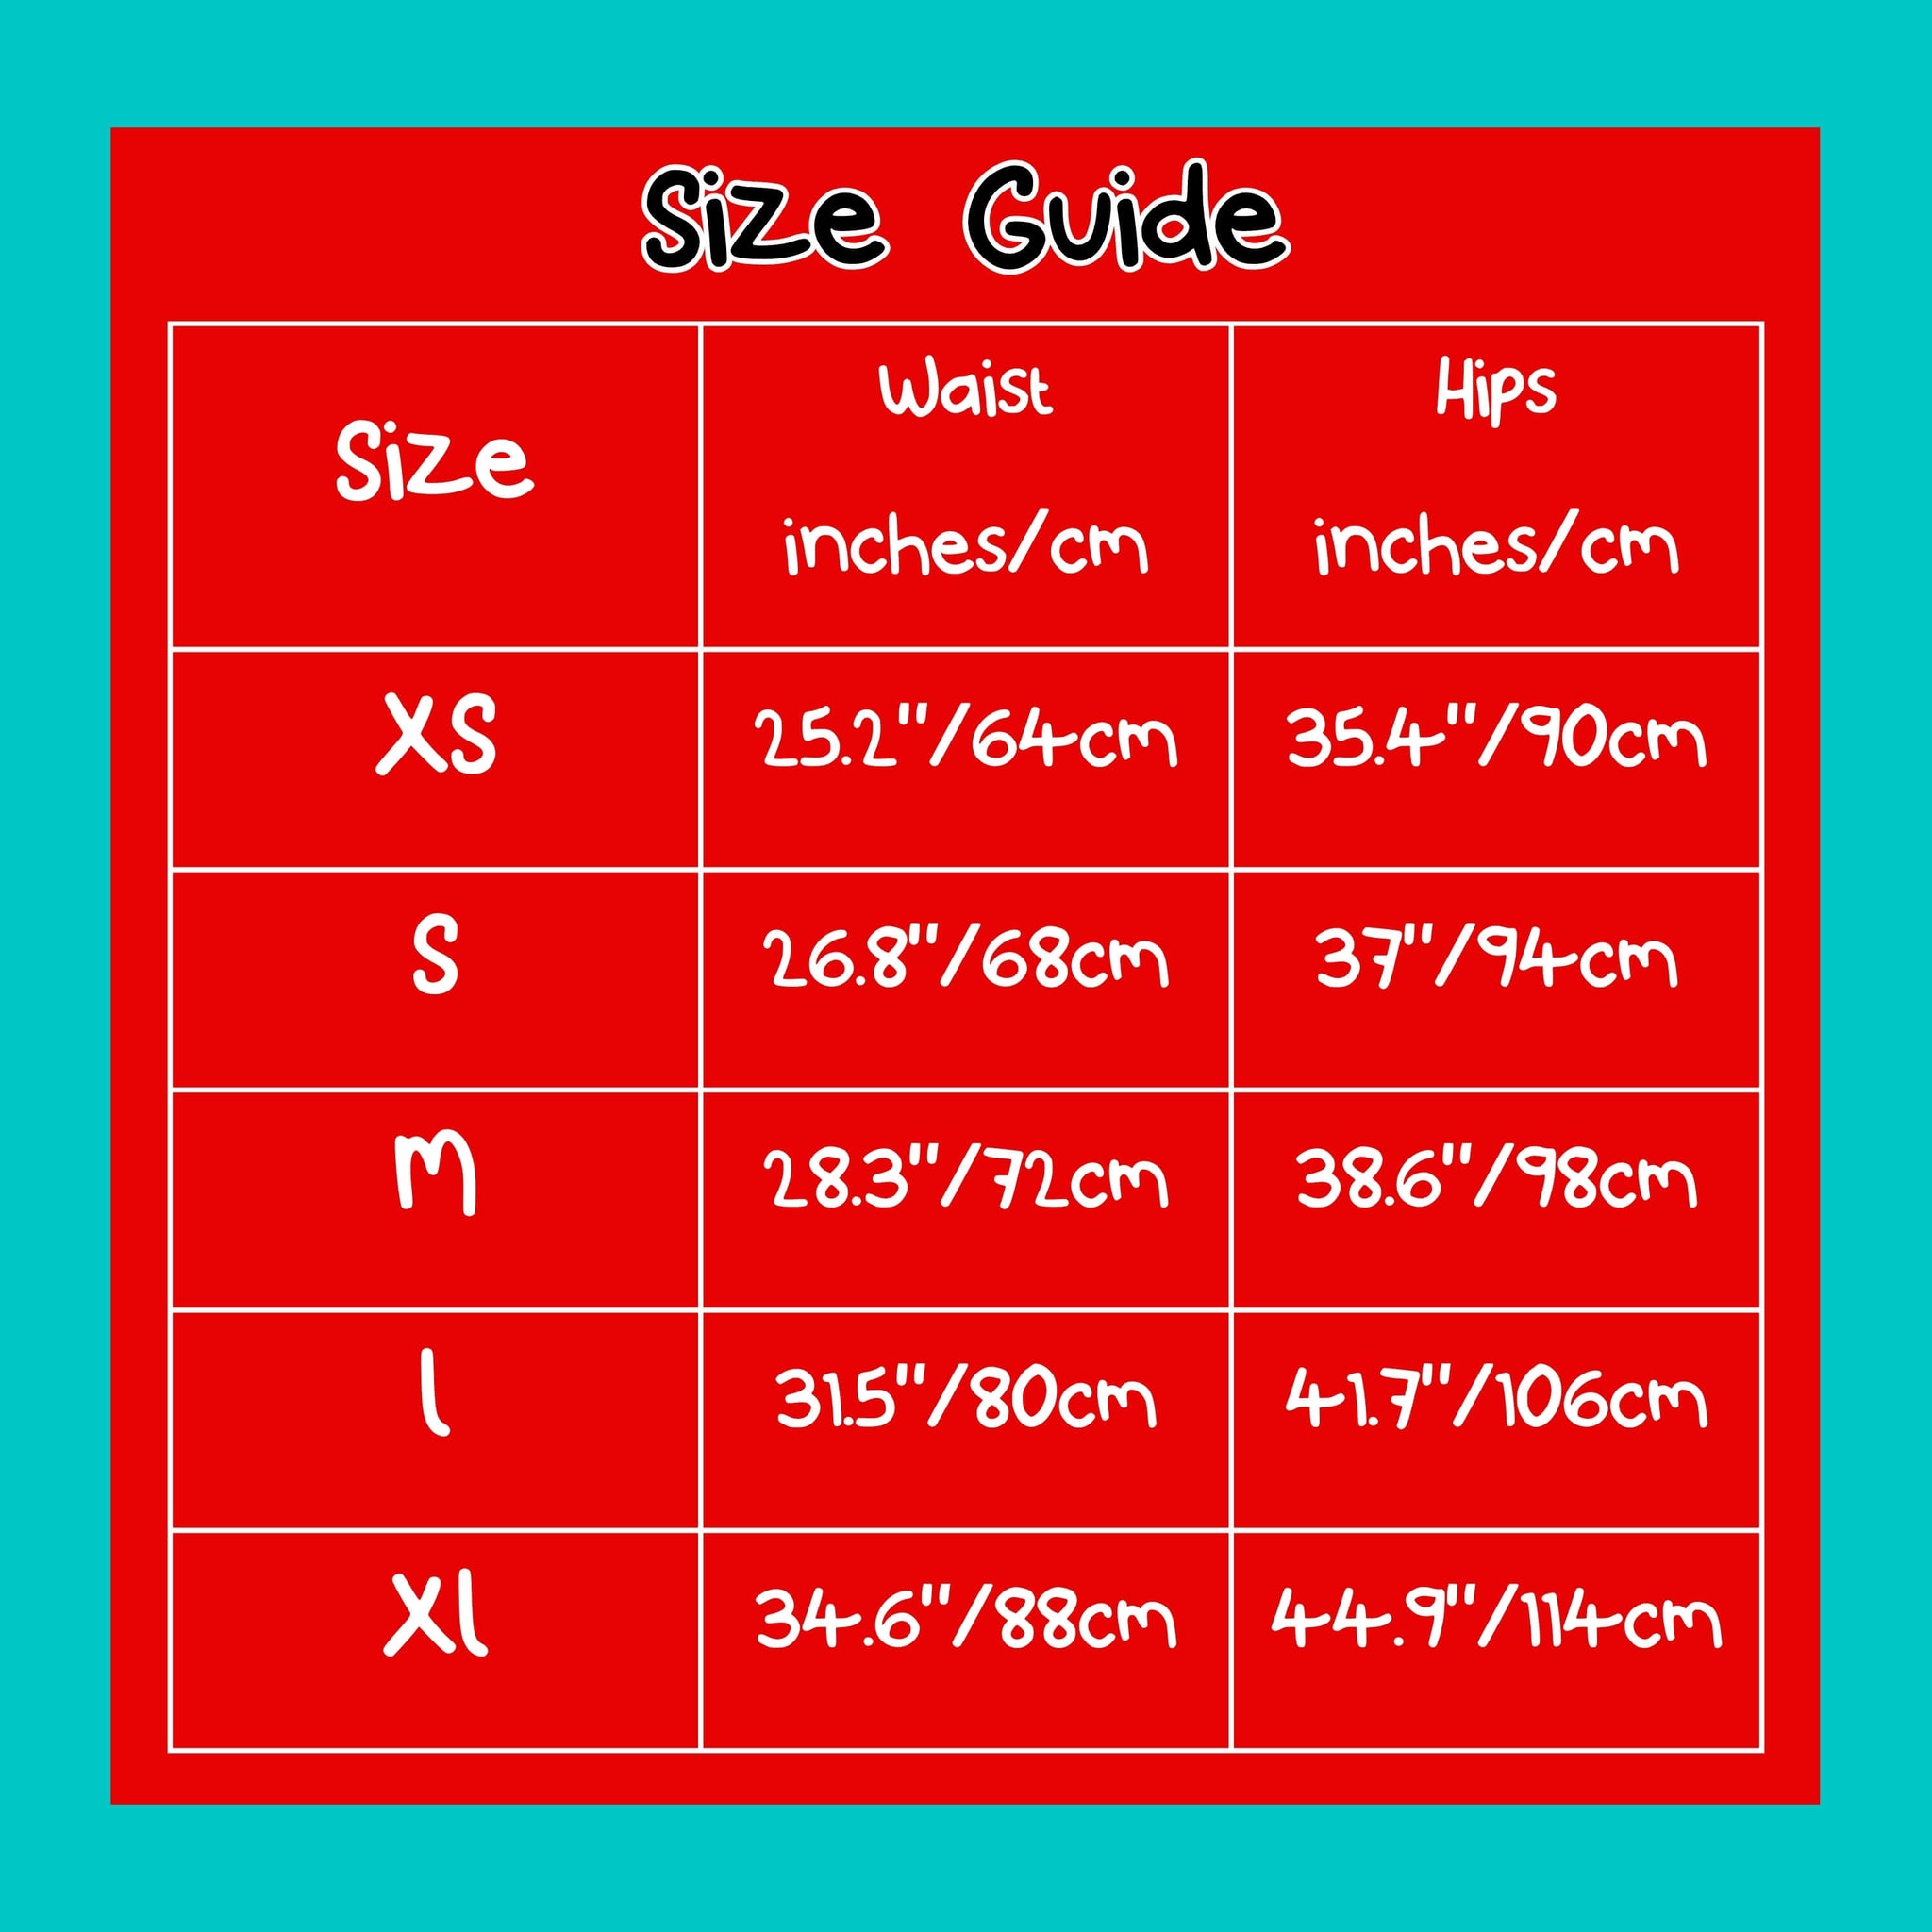 Size guide size chart measurements of the disabili tea and biscuits leggings in inches and centimetres.